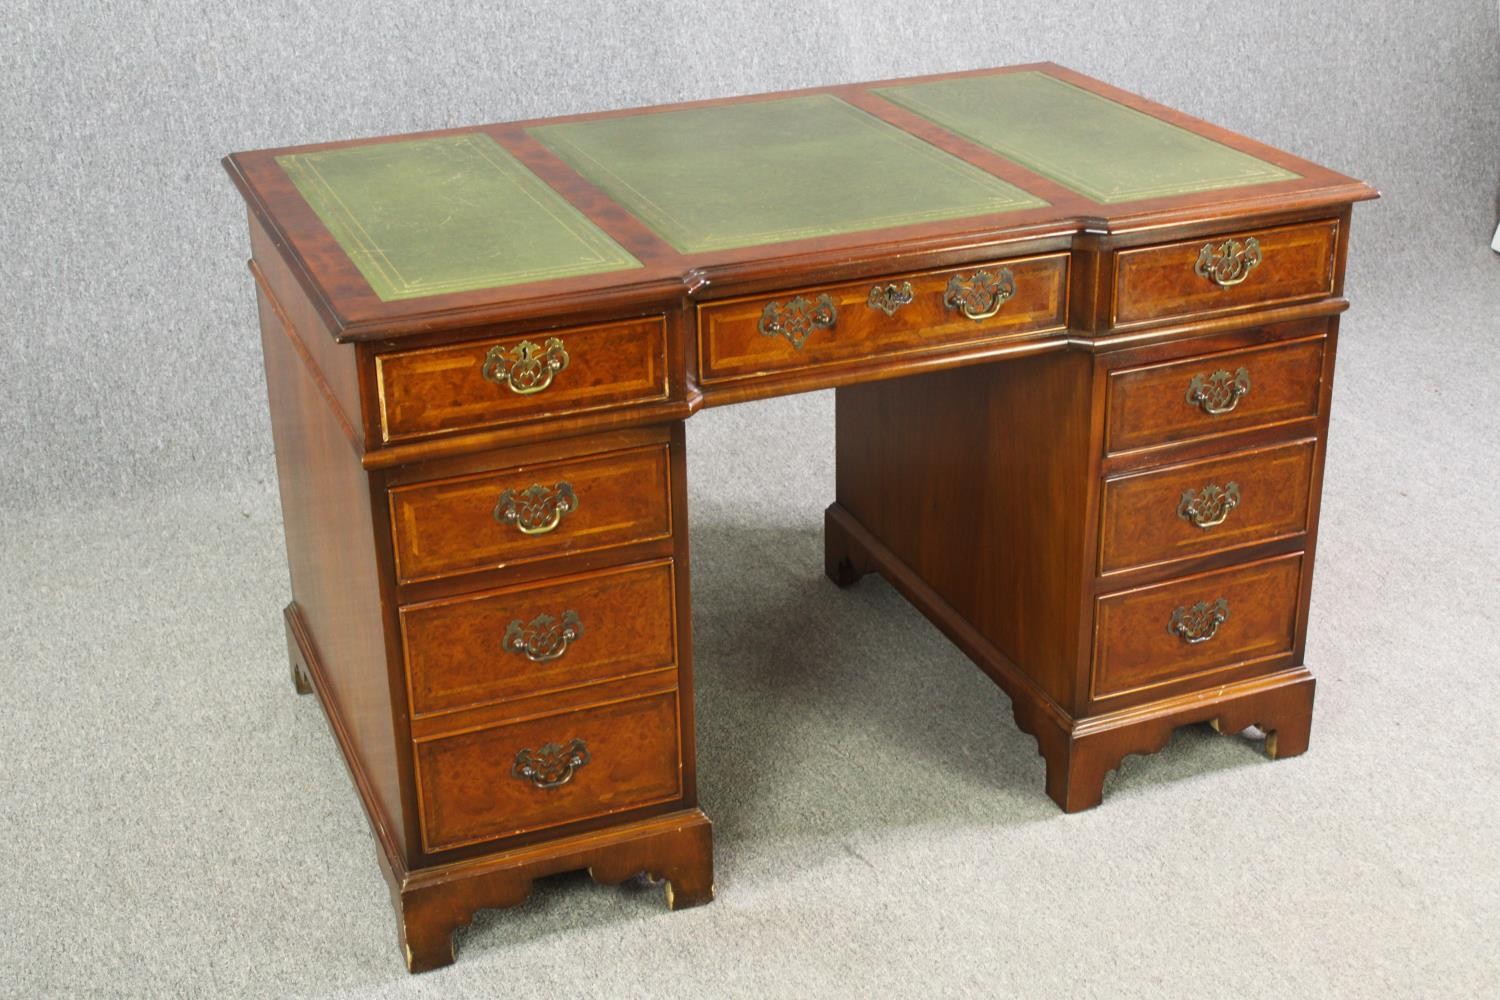 A burr walnut and satinwood inlaid Georgian style pedestal desk with inset leather top, 20th century - Image 3 of 9